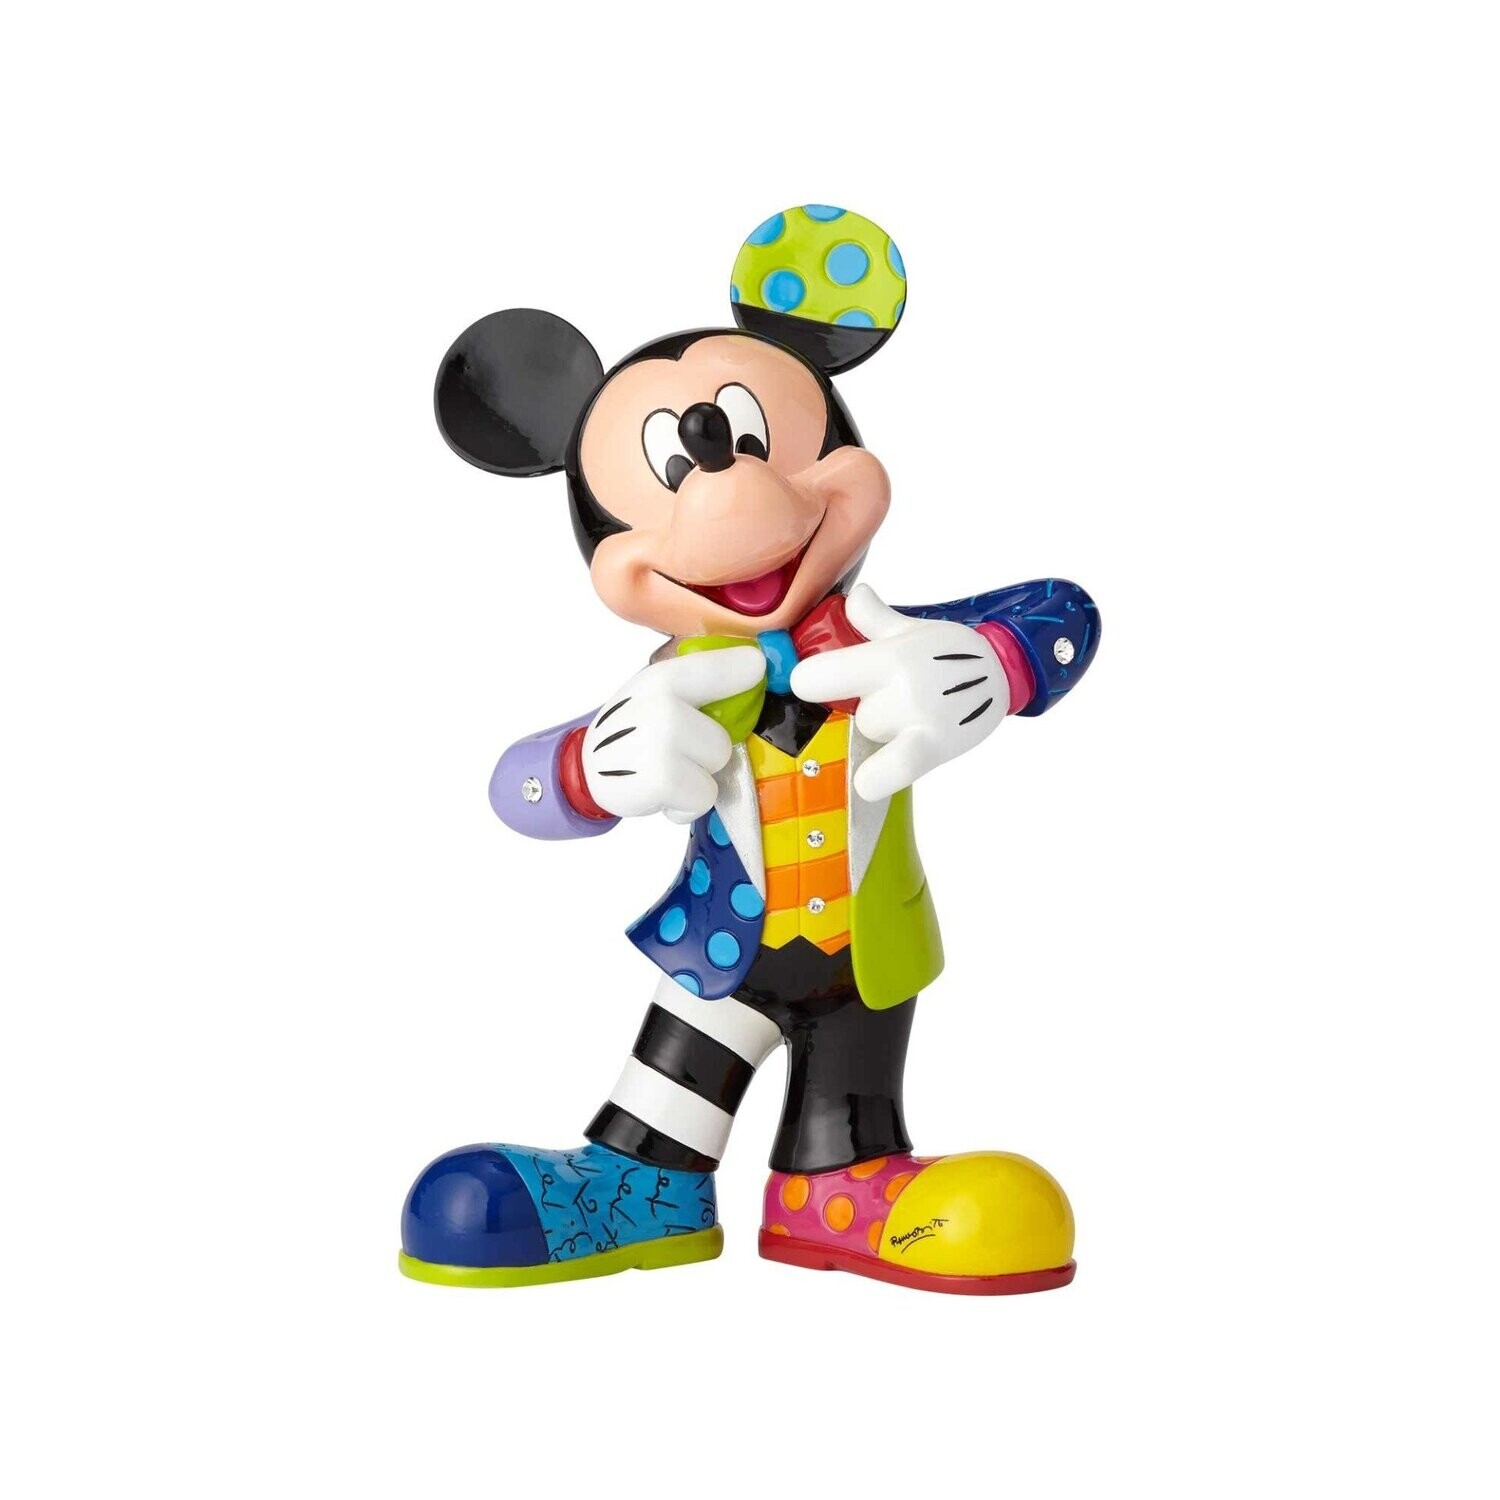 Disney by Britto "​Mickey’s 90th" Bling Figurine (6001010)